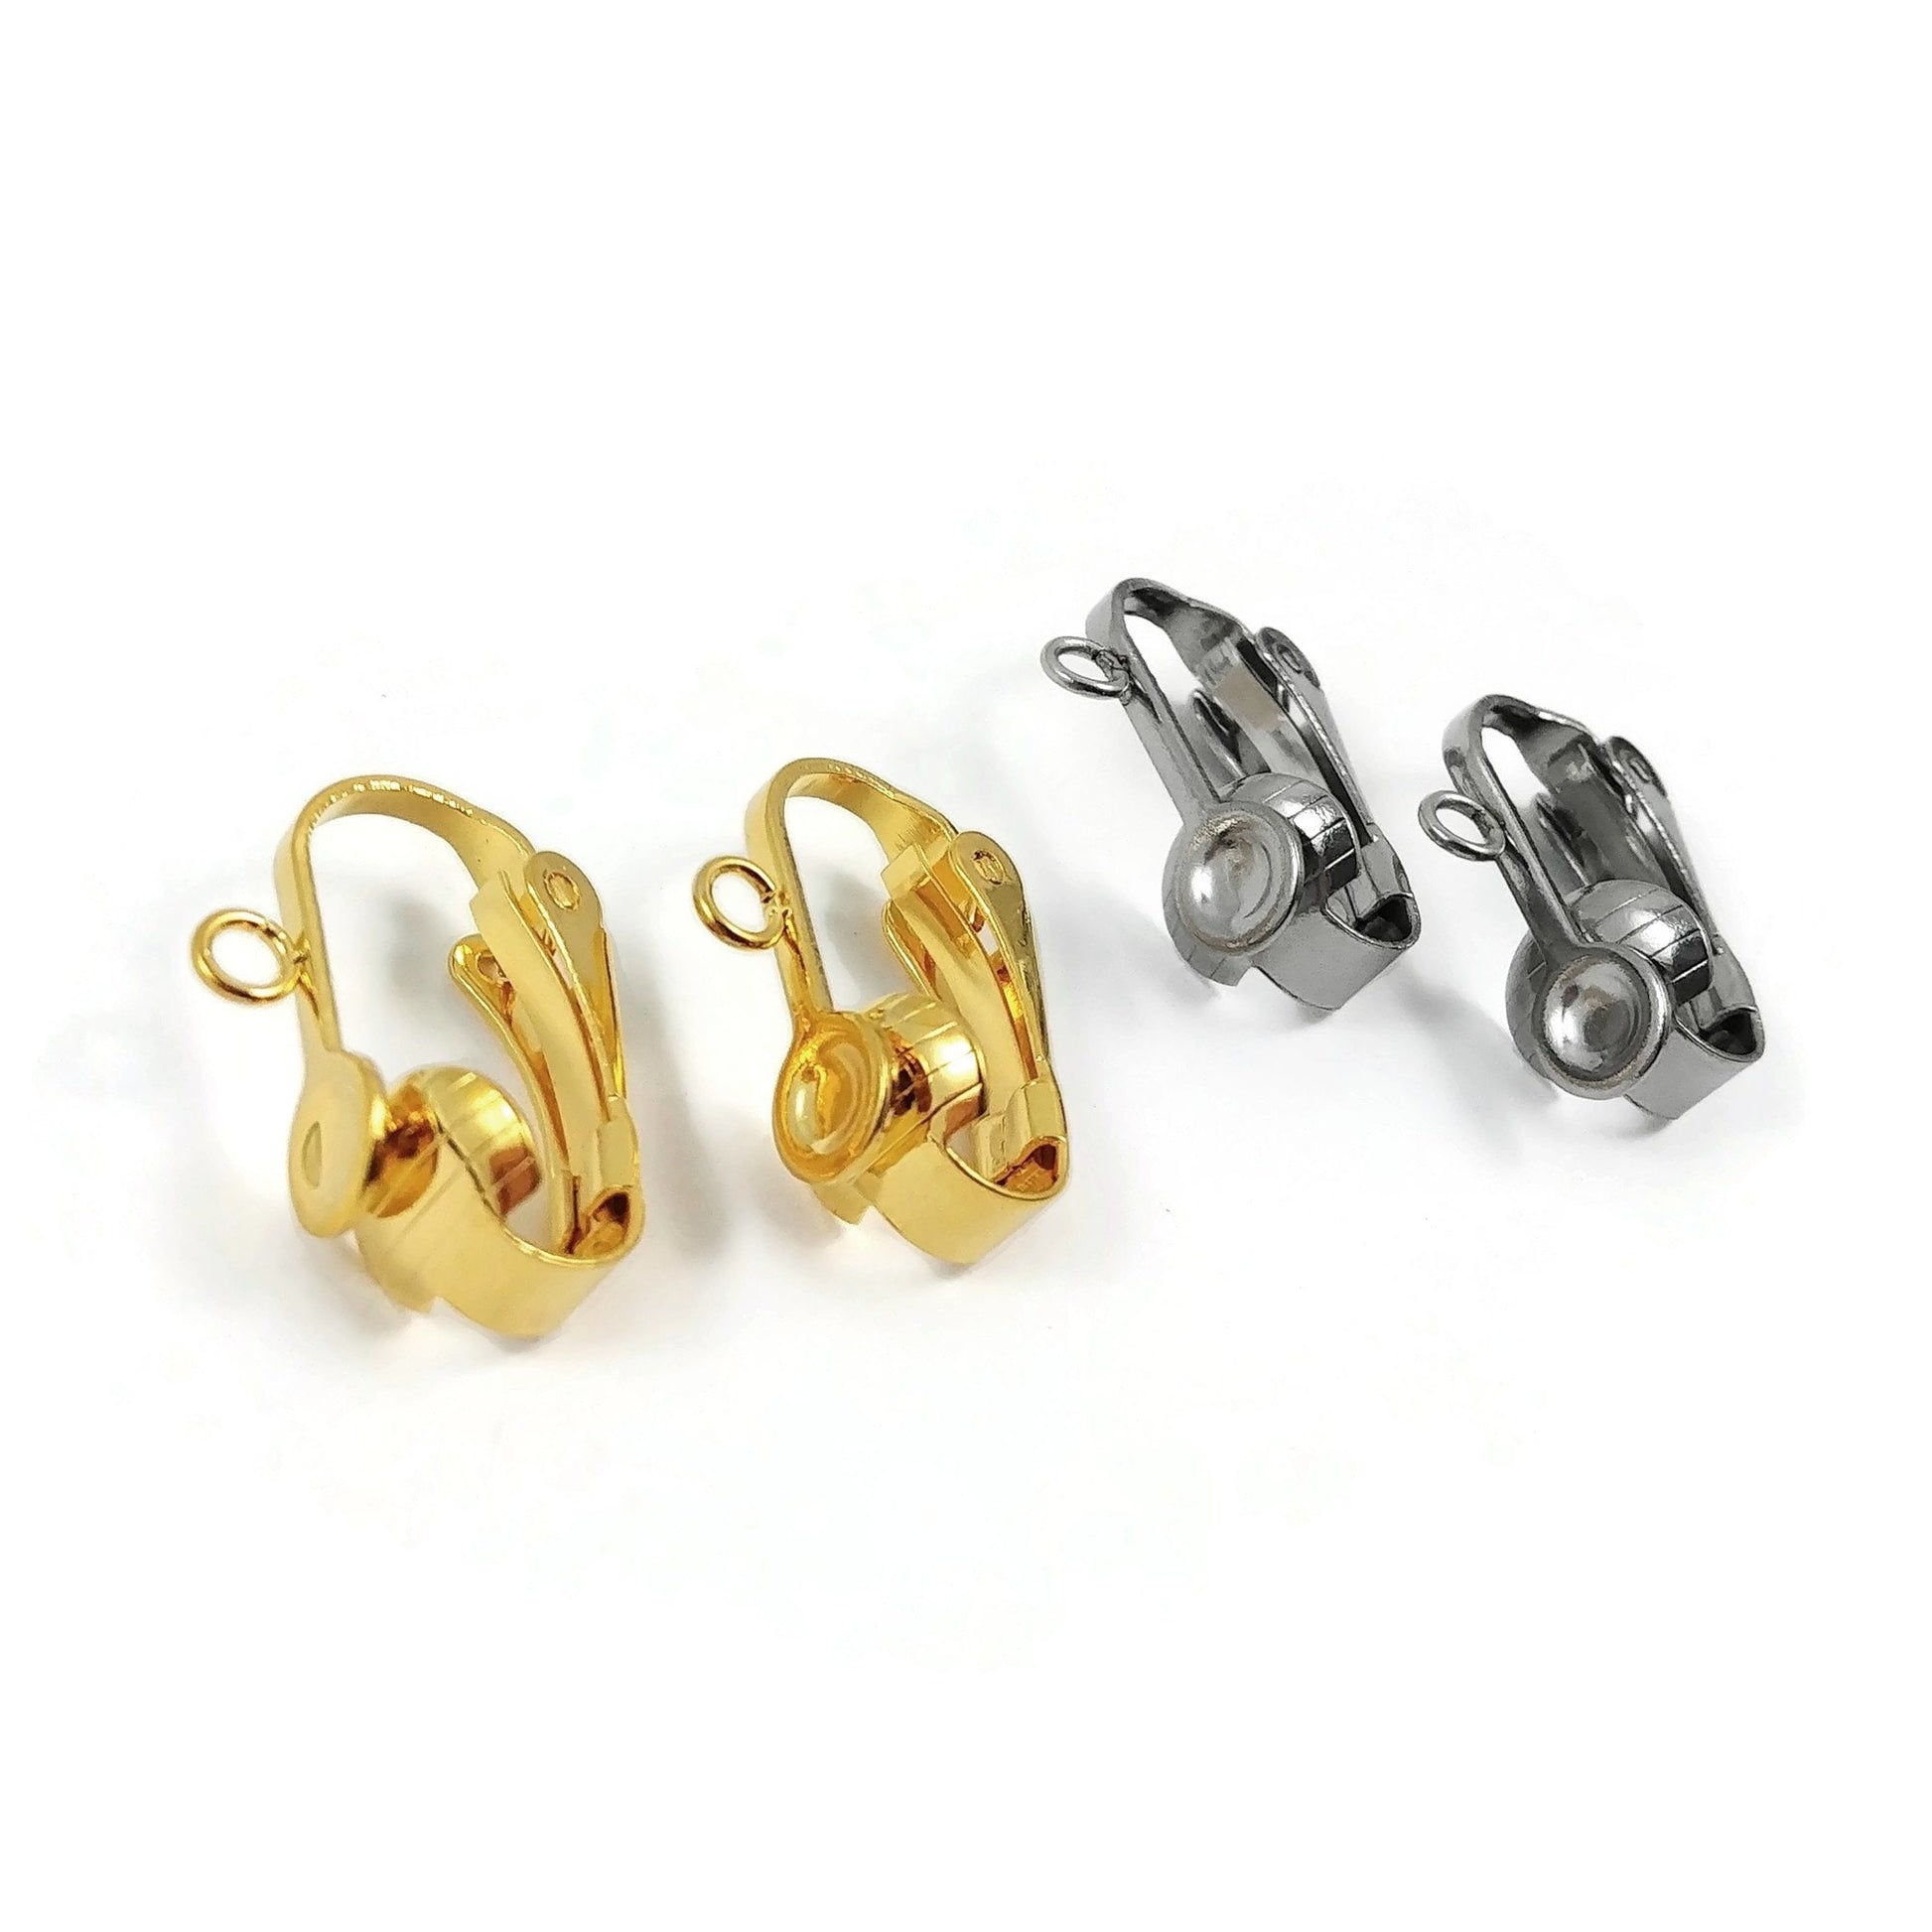 Stainless steel clip on earring findings with pad and loop, Hypoallergenic jewelry making supplies